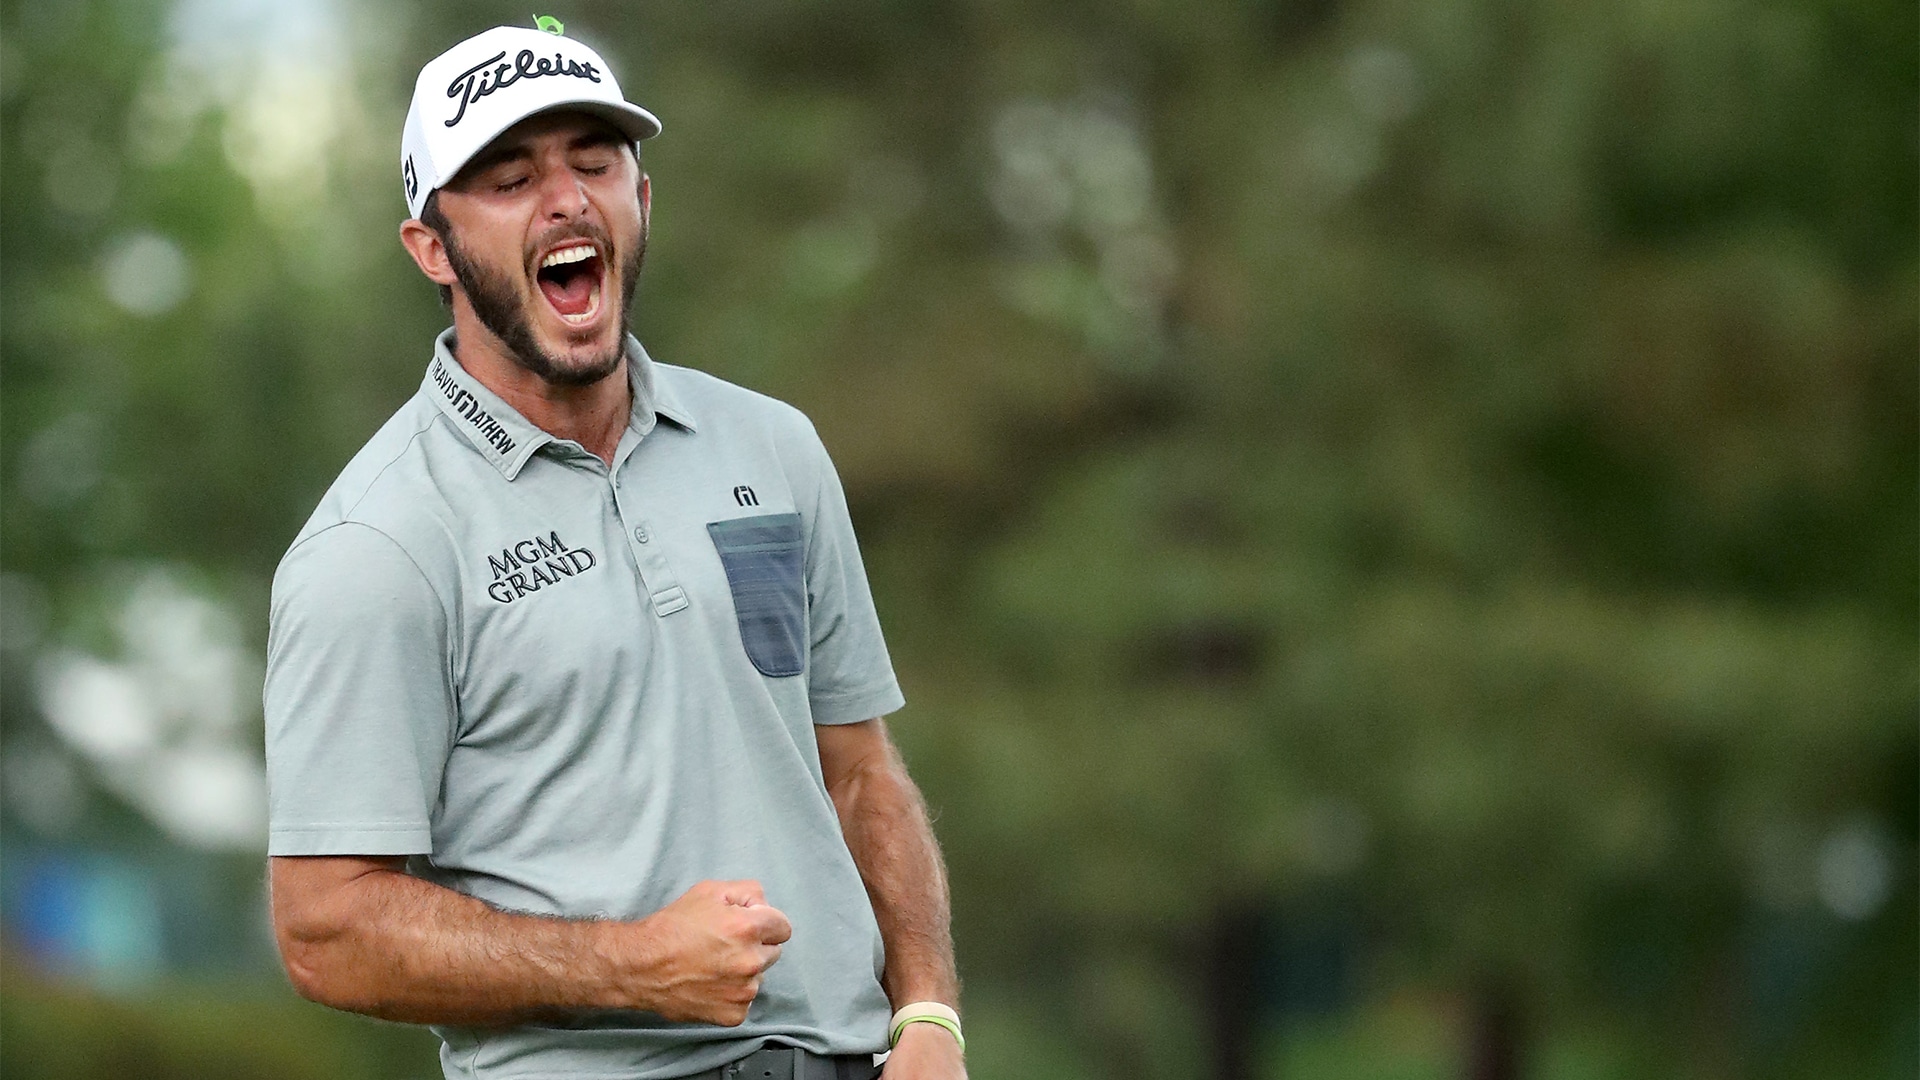 Max Homa Cruises To First Career Win At Wells Fargo Championship